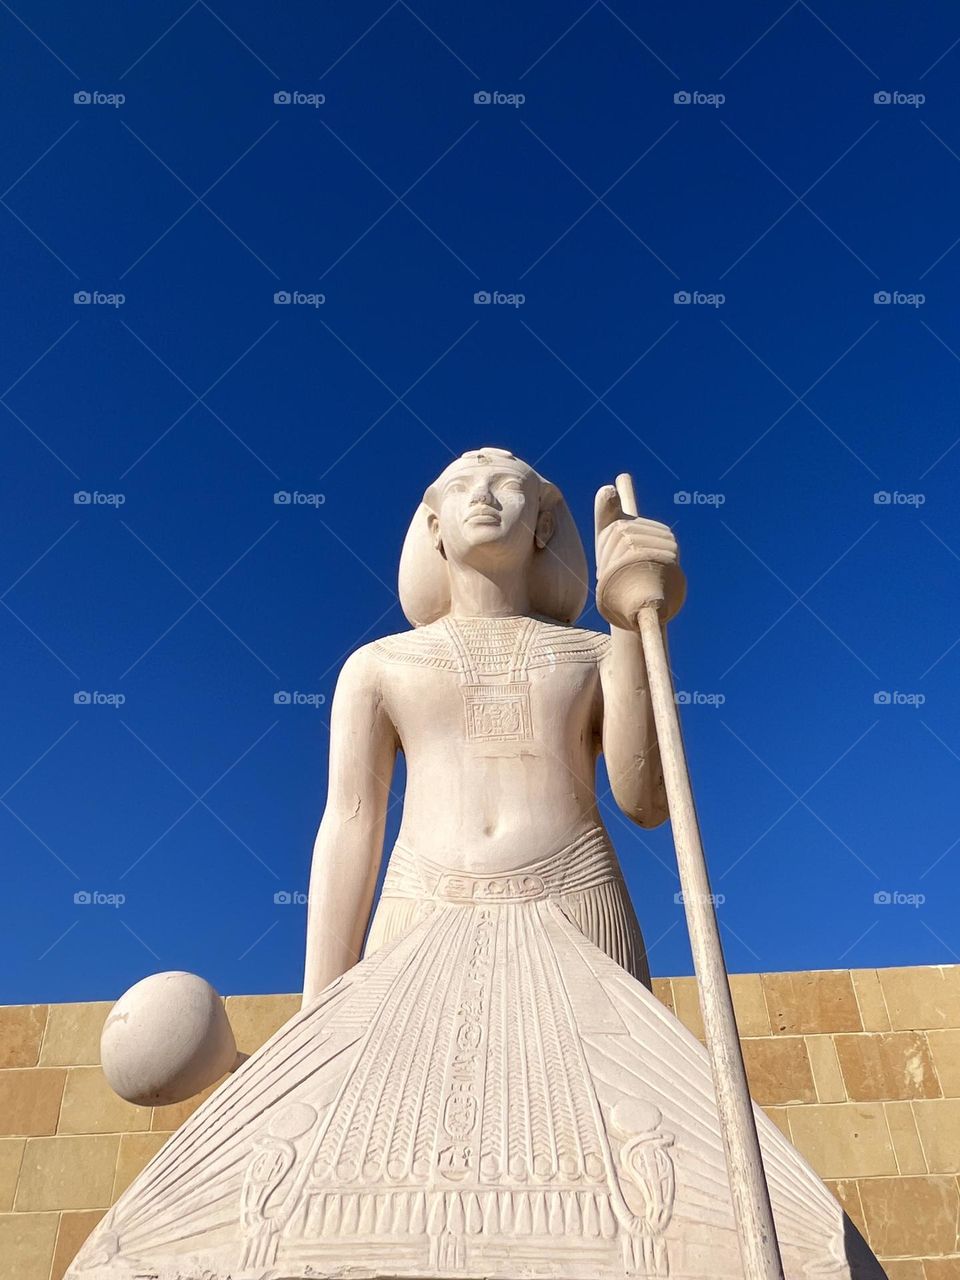 From the ground up. Egypt. Blue sky and Egyptian pharaoh sculpture 